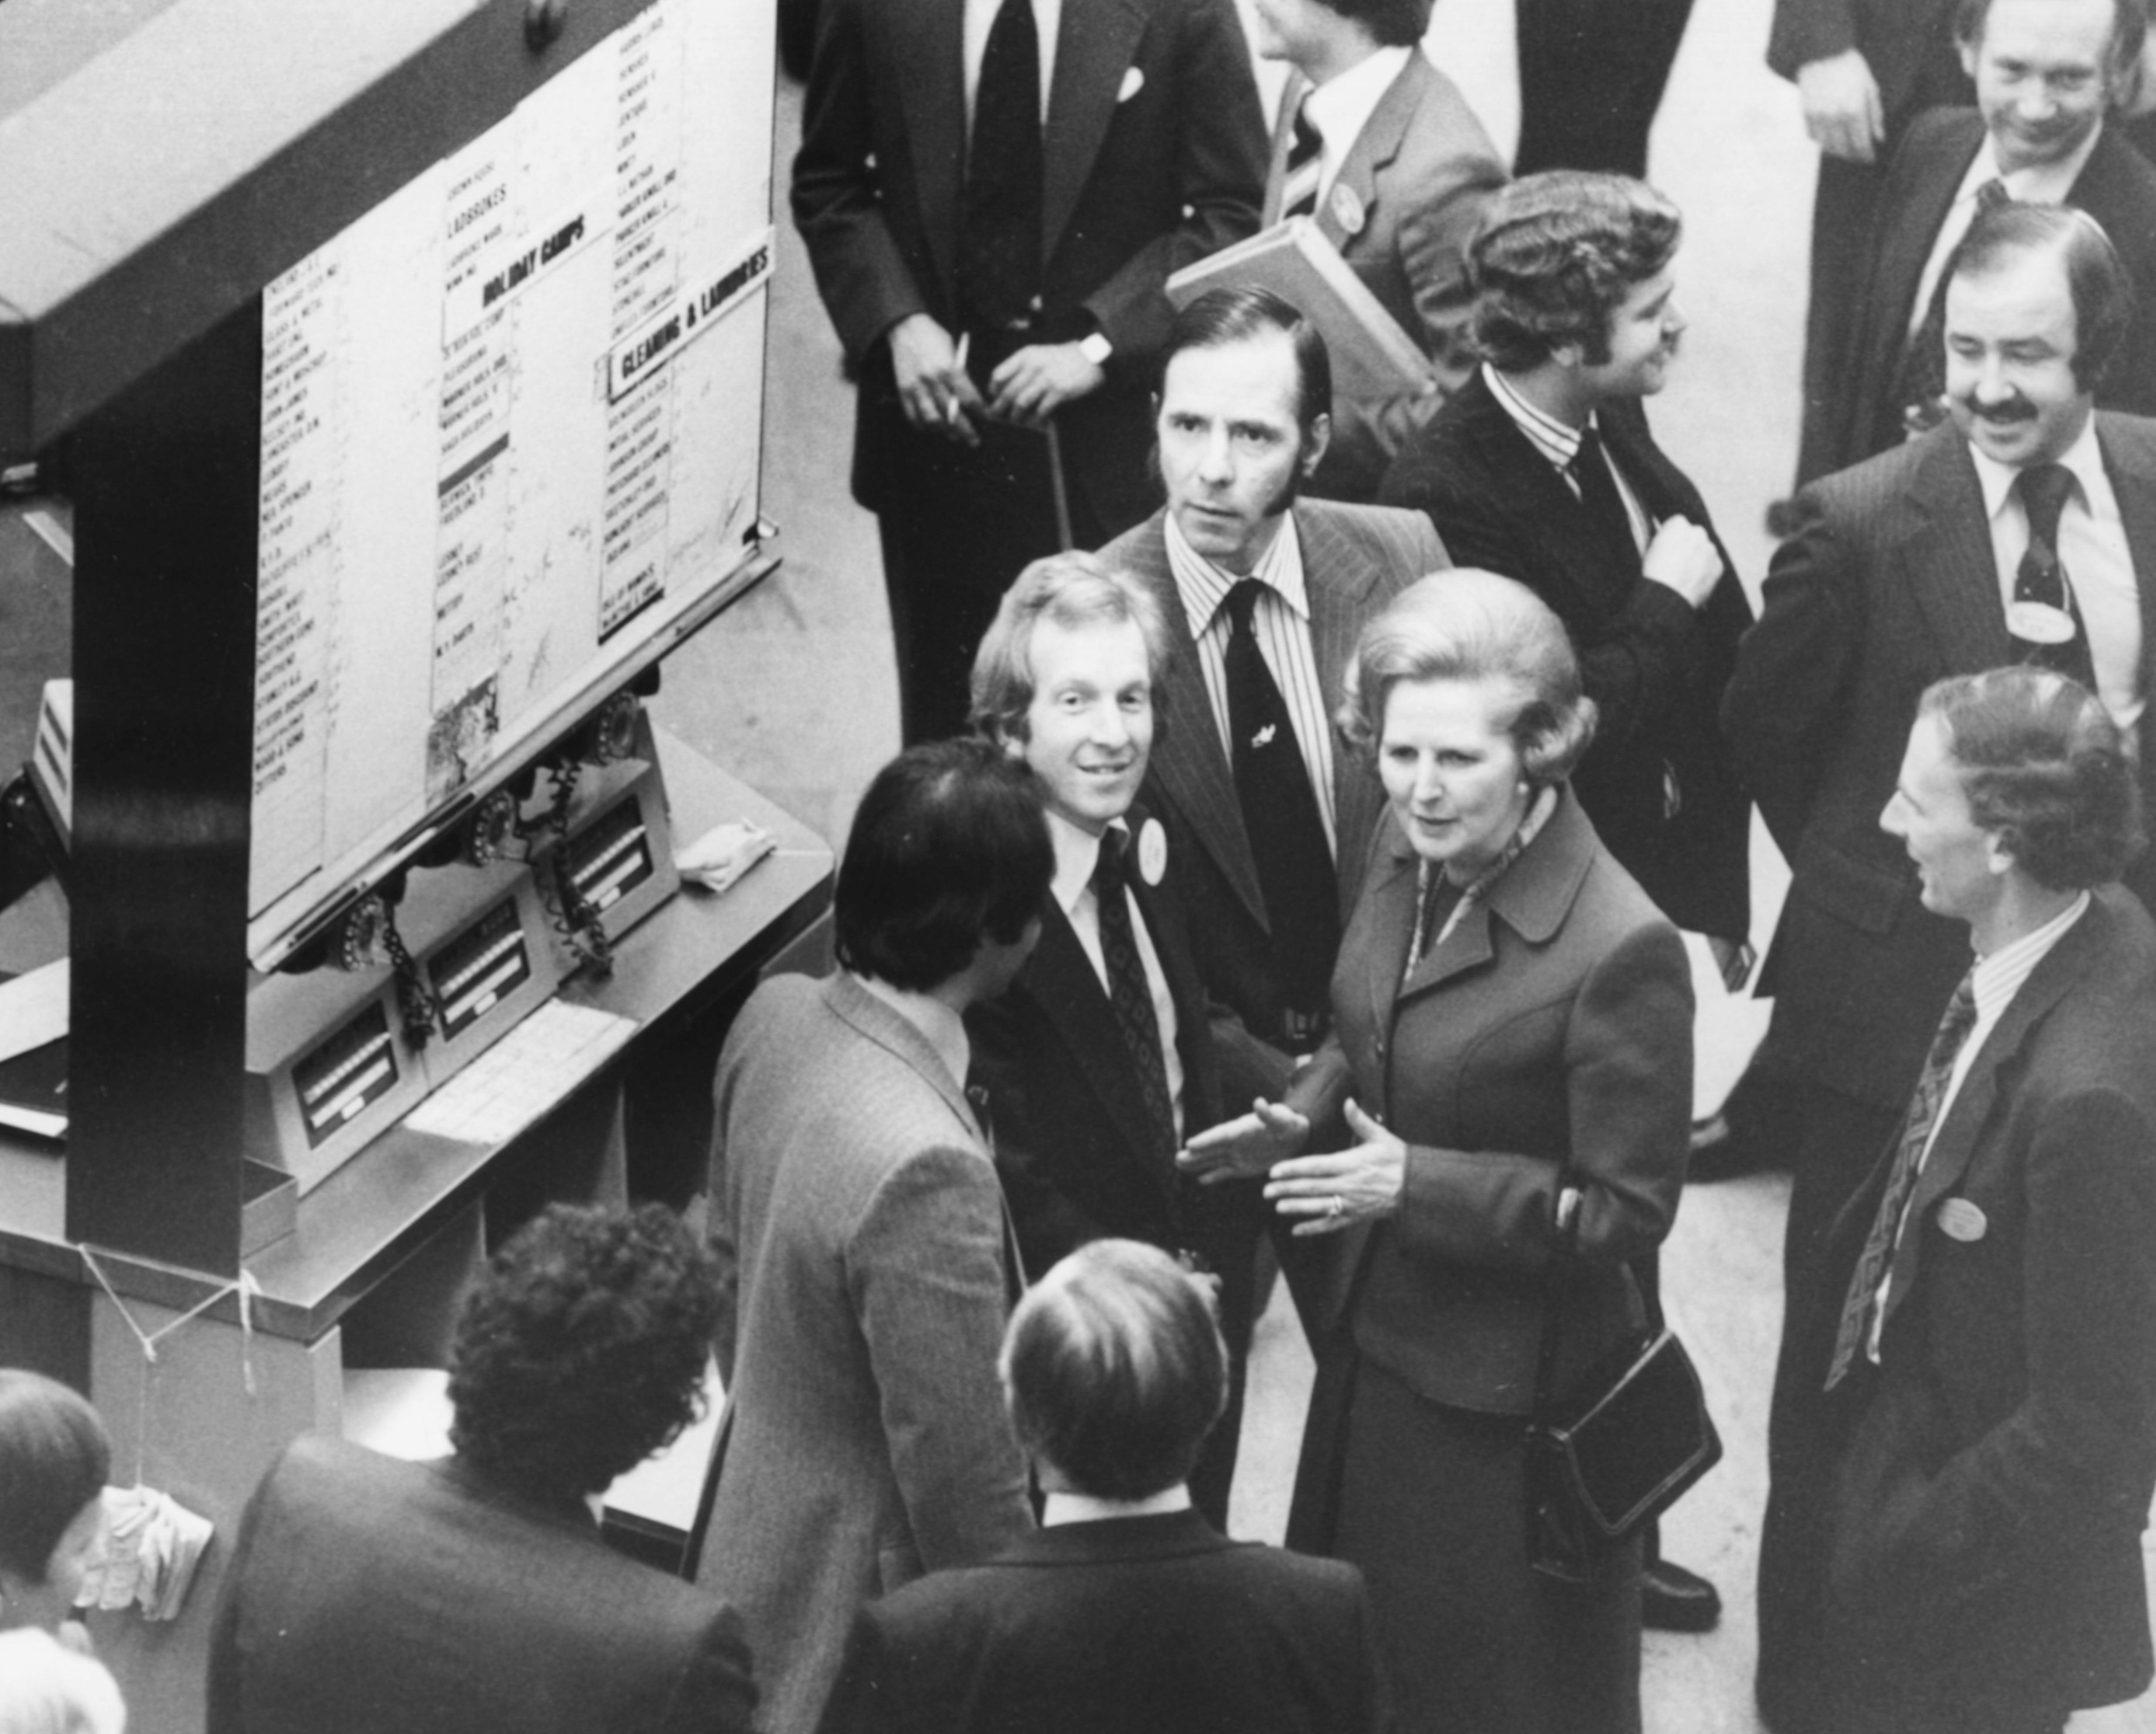 So anxious were Thatcher and her colleagues to dismantle the public sector that they were clearing the debts, writing them off – and flogging the industry cheaply